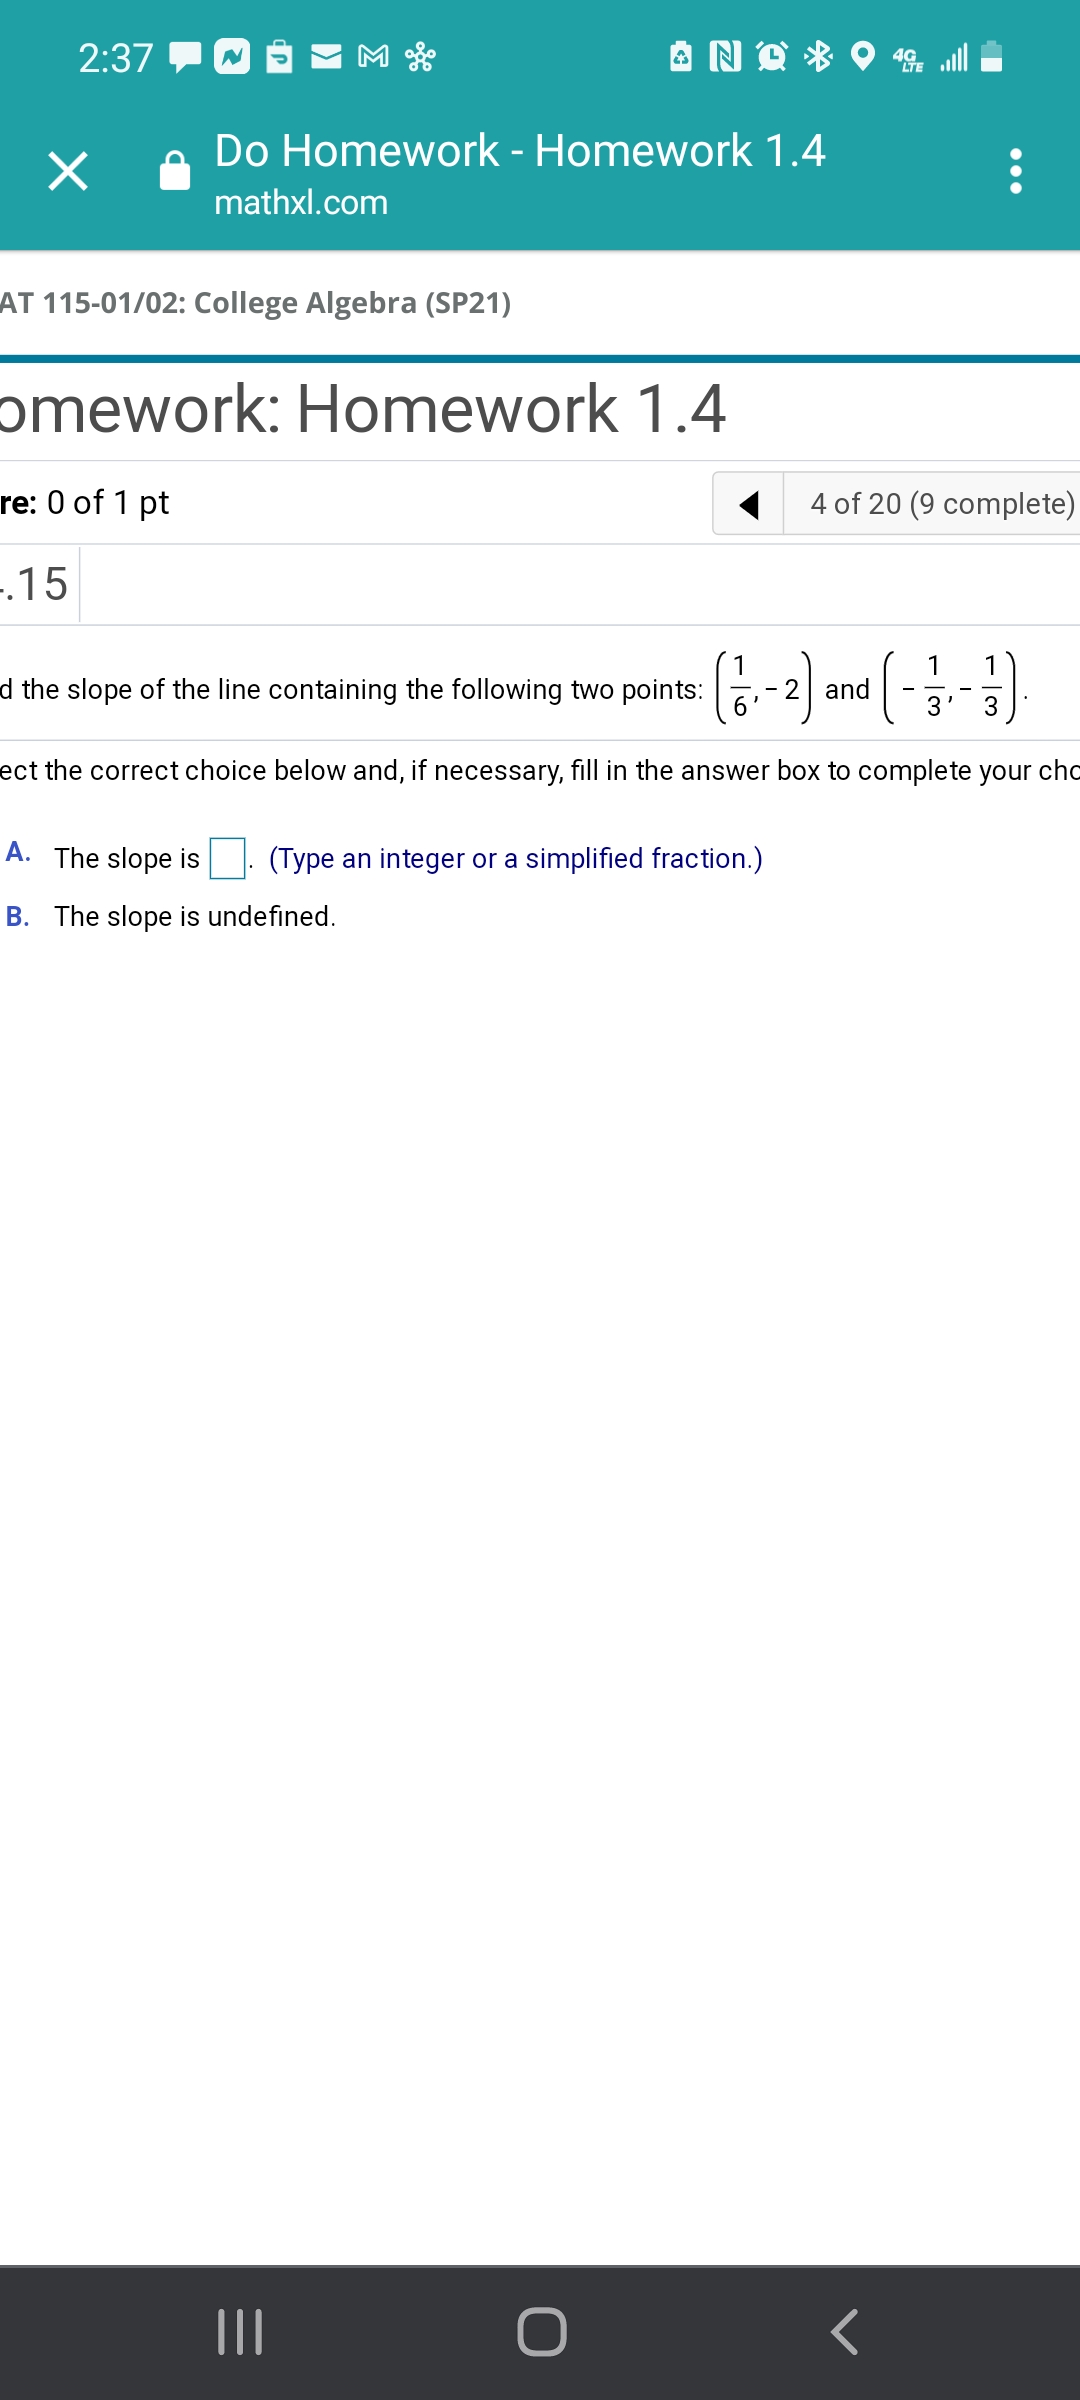 2:37
Do Homework - Homework 1.4
mathxl.com
AT 115-01/02: College Algebra (SP21)
omework: Homework 1.4
re: 0 of 1 pt
4 of 20 (9 complete)
-.15
1
1
d the slope of the line containing the following two points:
and
3
ect the correct choice below and, if necessary, fill in the answer box to complete your cho
A. The slope is
(Type an integer or a simplified fraction.)
B. The slope is undefined.
II
